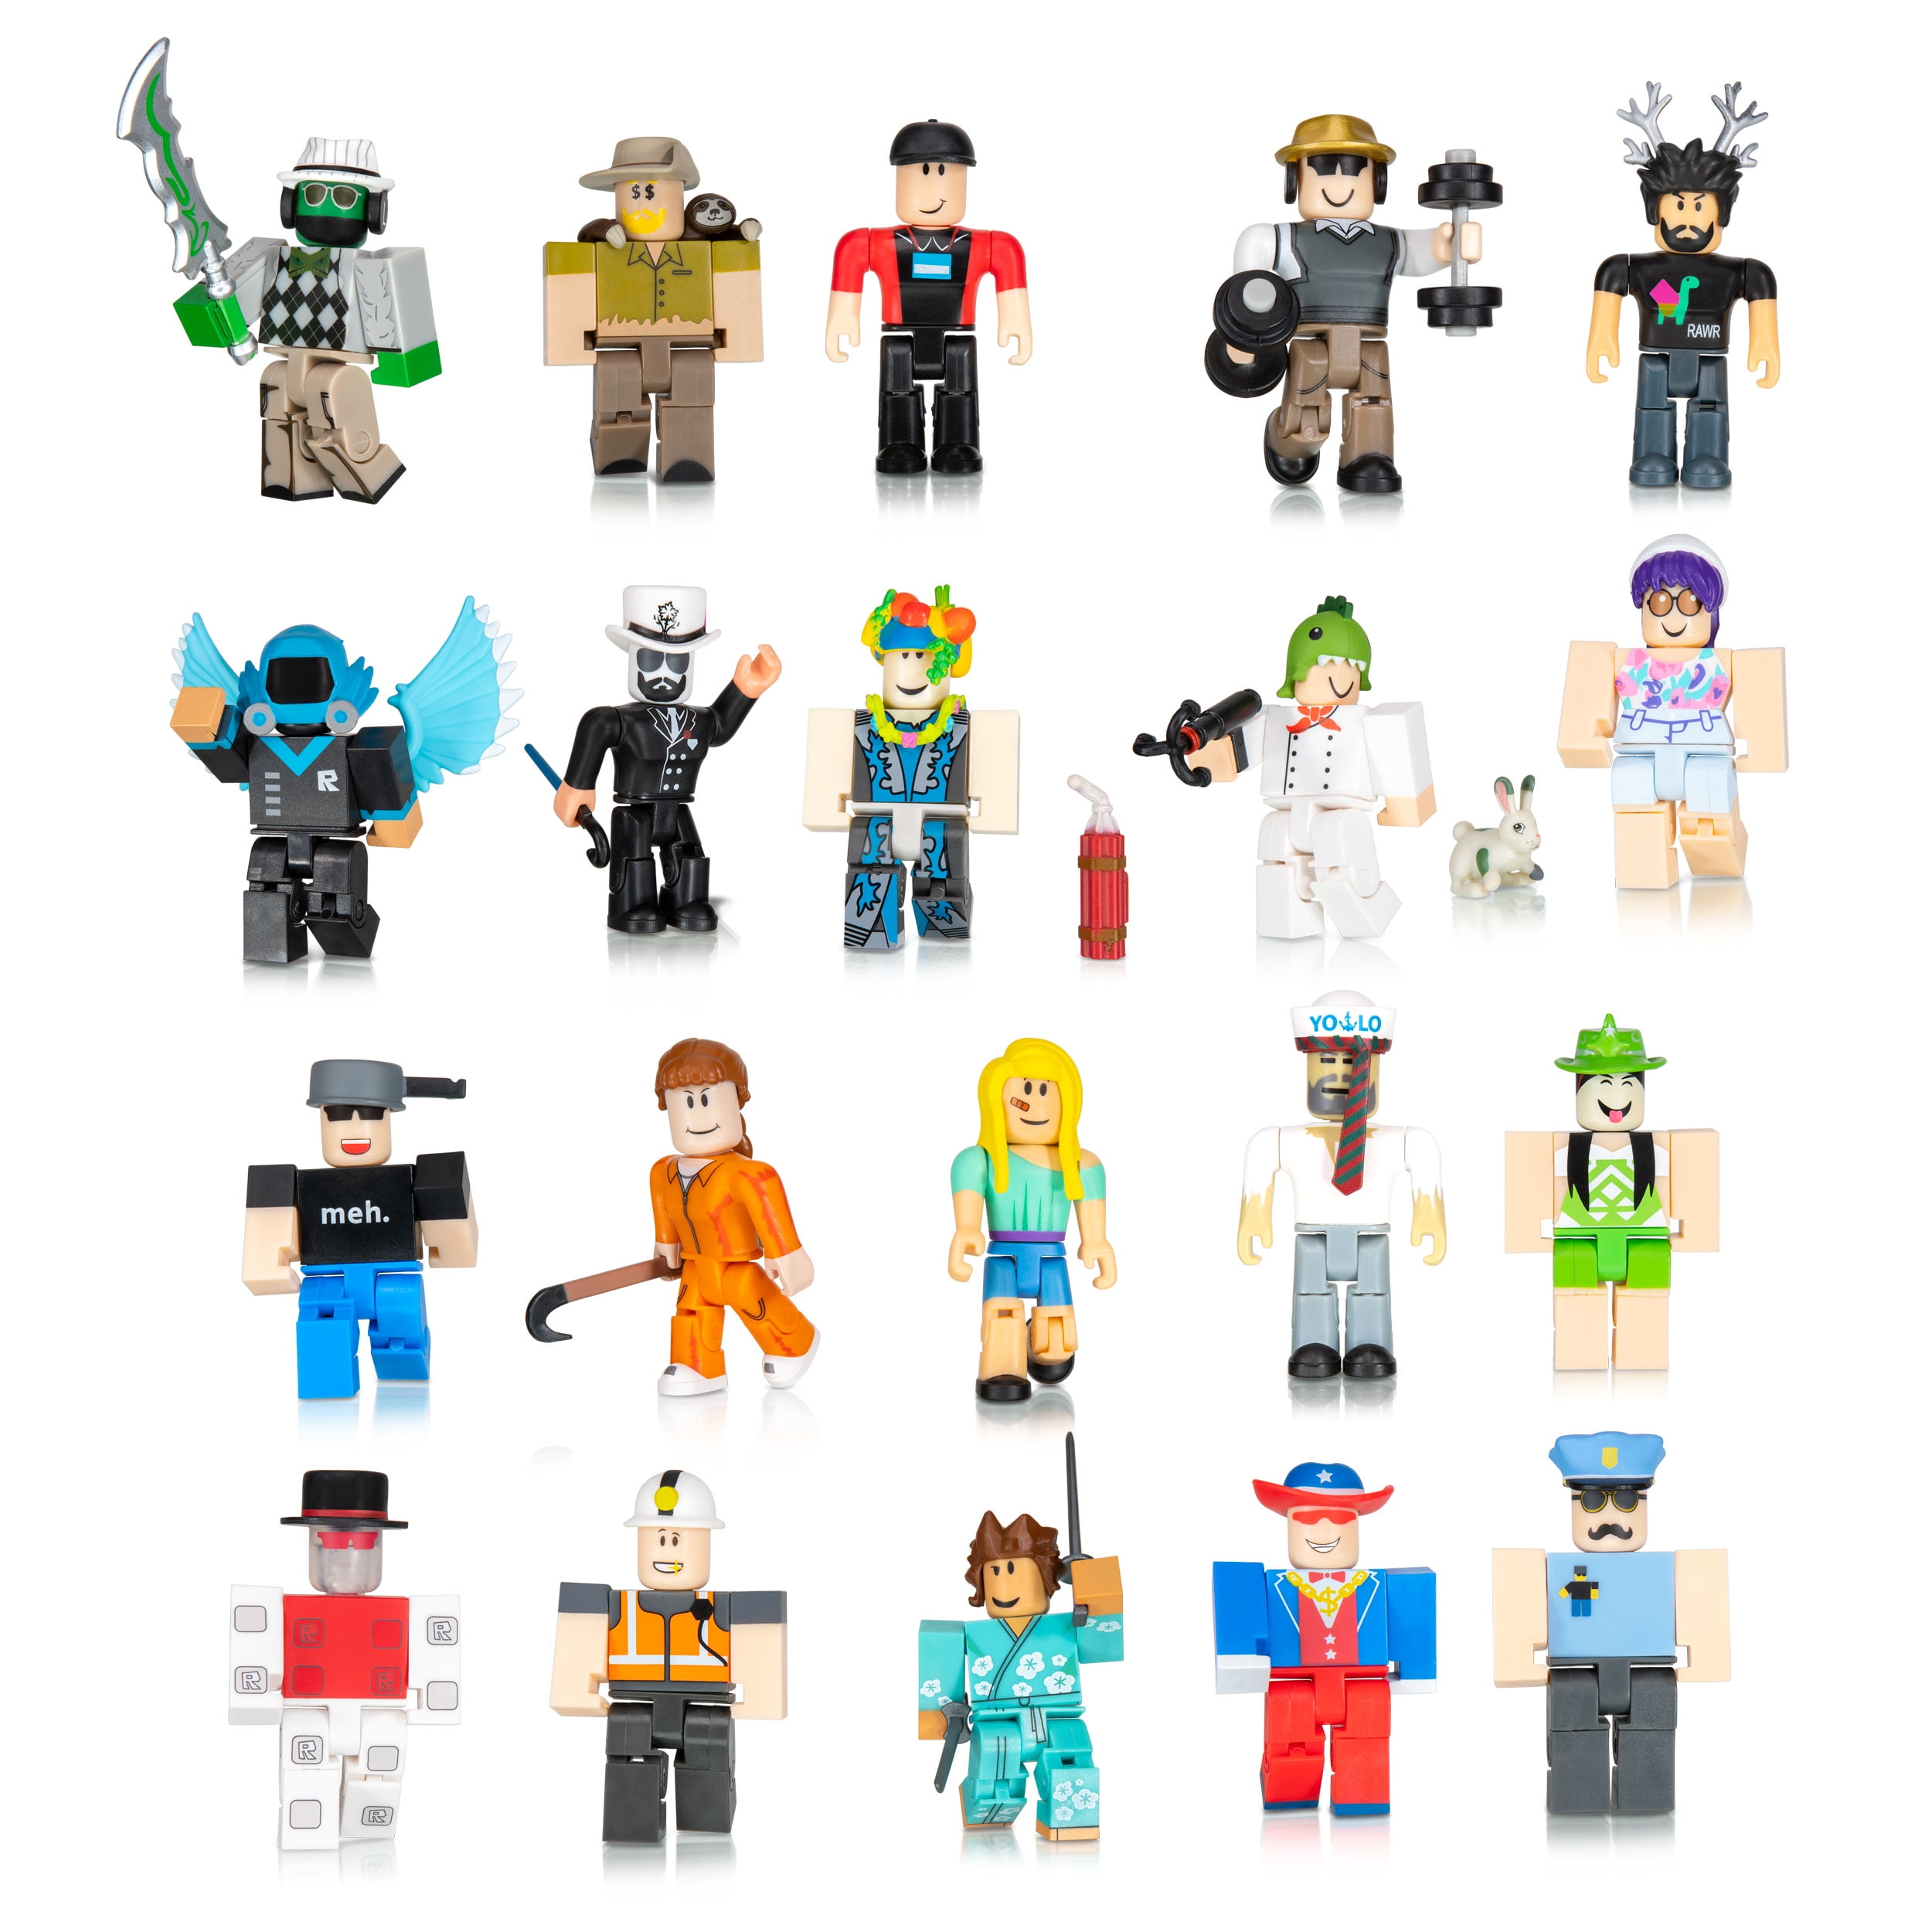 Roblox Action Collection From The Vault 20 Figure Pack Includes 20 Exclusive Virtual Items Walmart Com Walmart Com - vault door openin g roblox